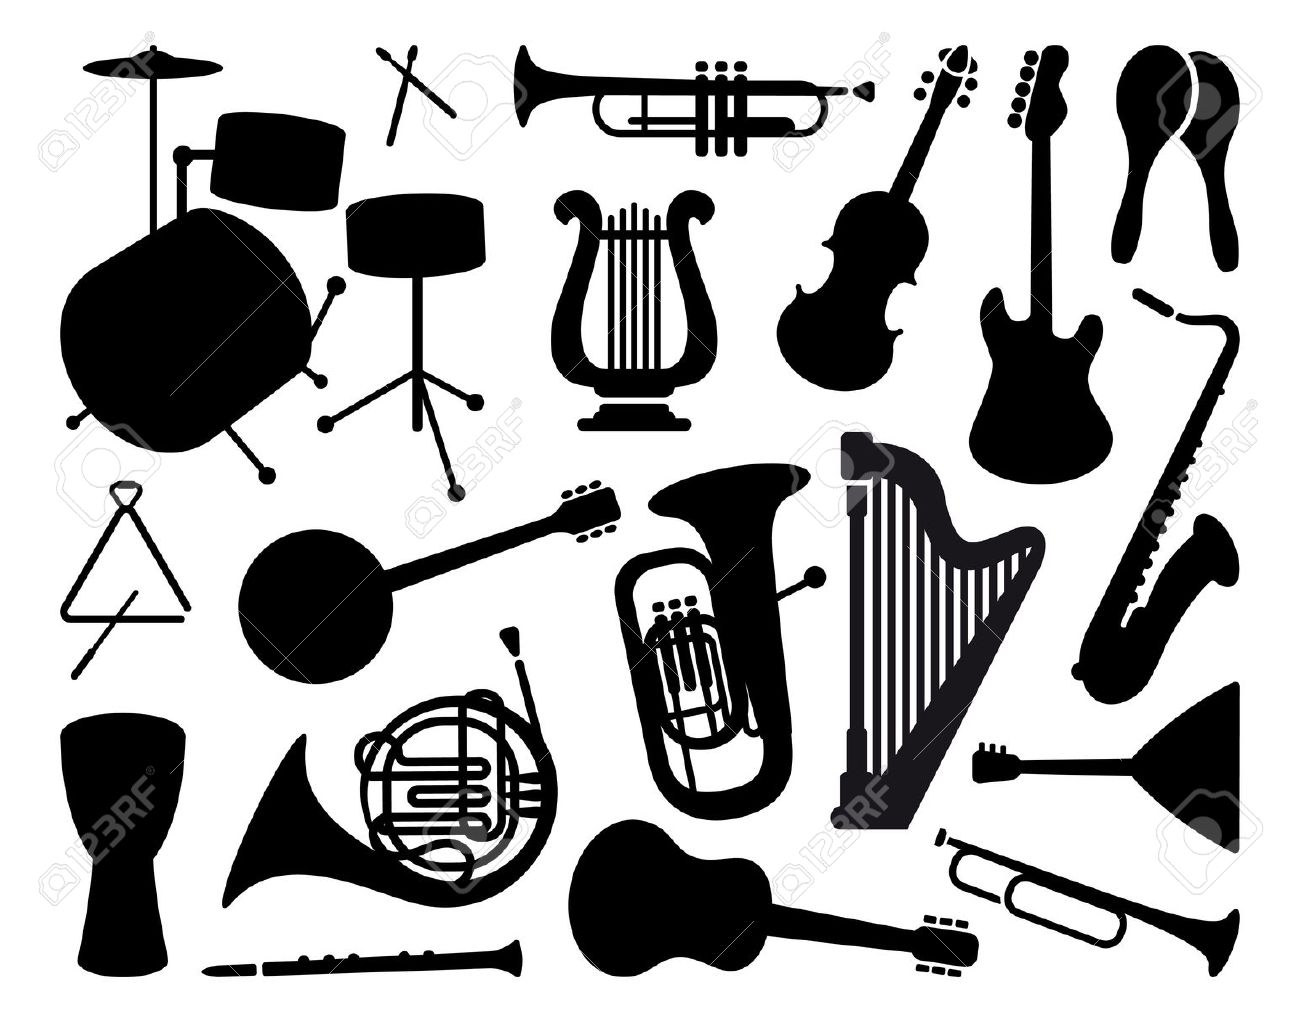 Instrument High Quality Background on Wallpapers Vista